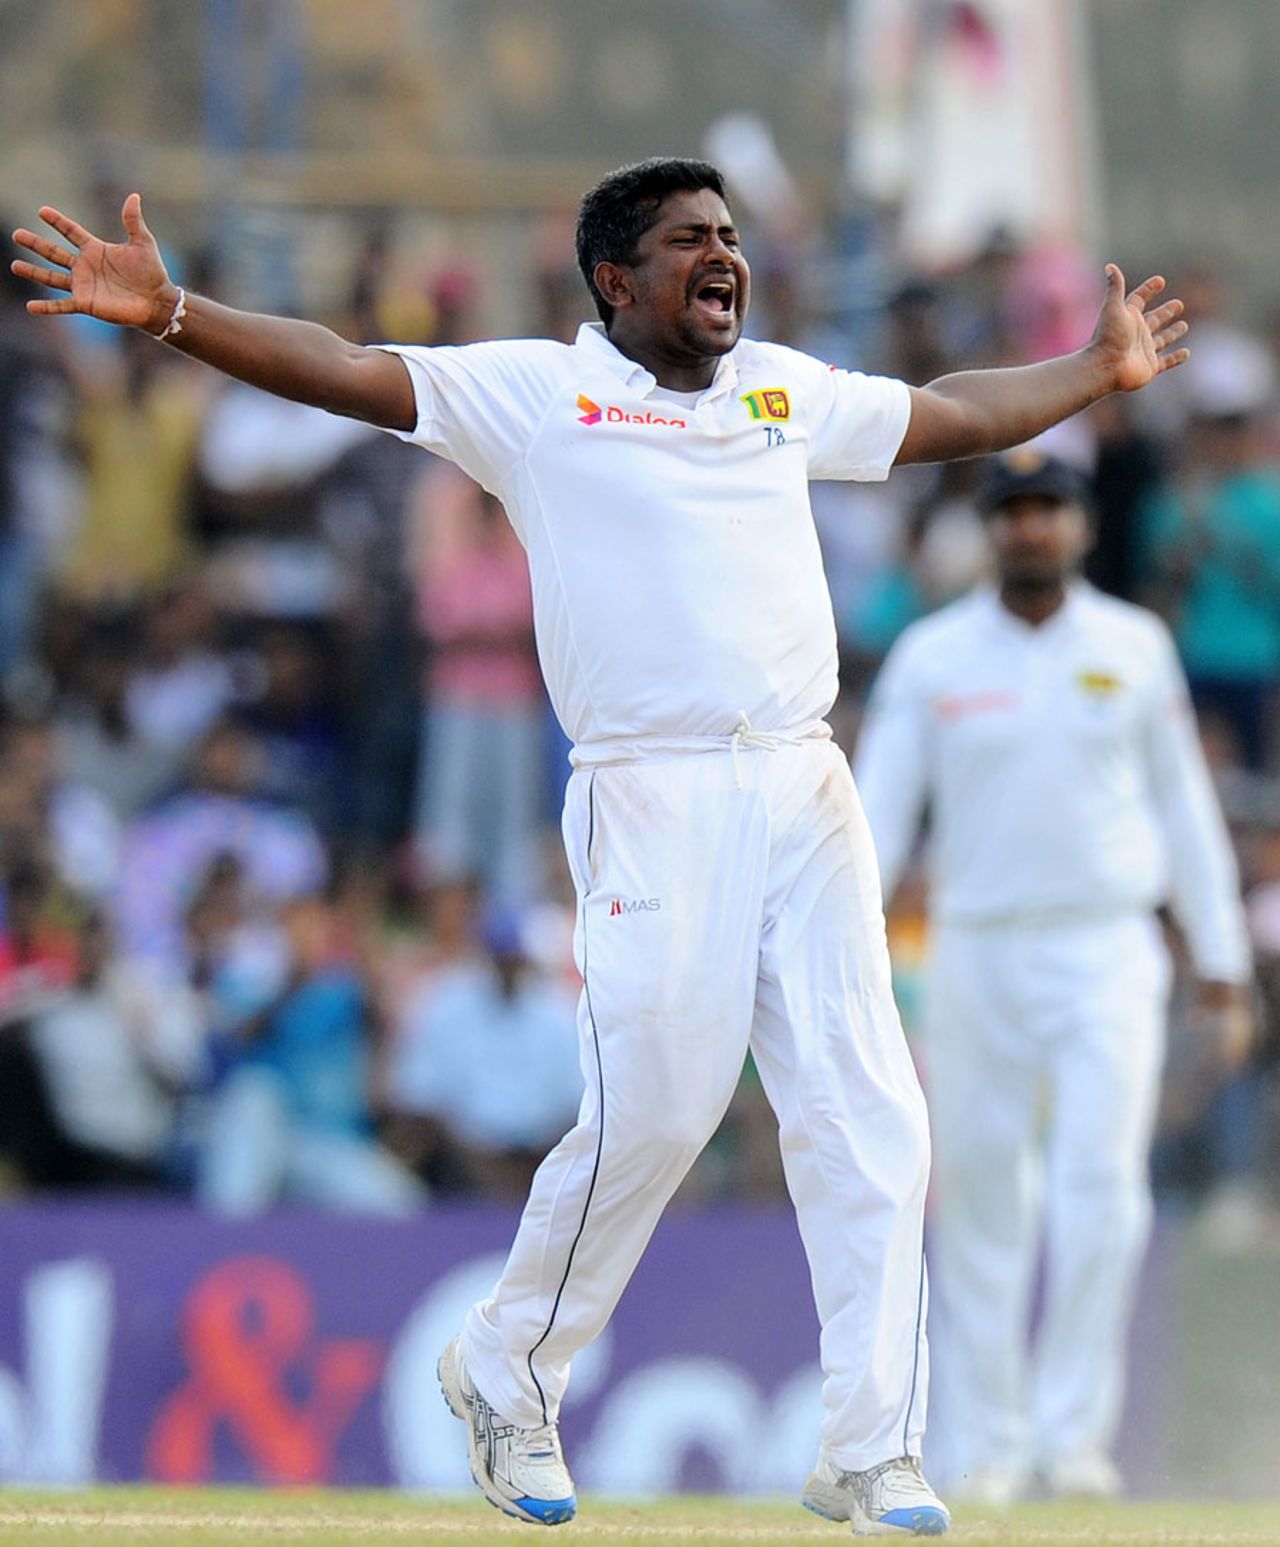 Rangana Herath finished with 6 for 48, Sri Lanka v Pakistan, 1st Test, Galle, 5th day, August 10, 2014